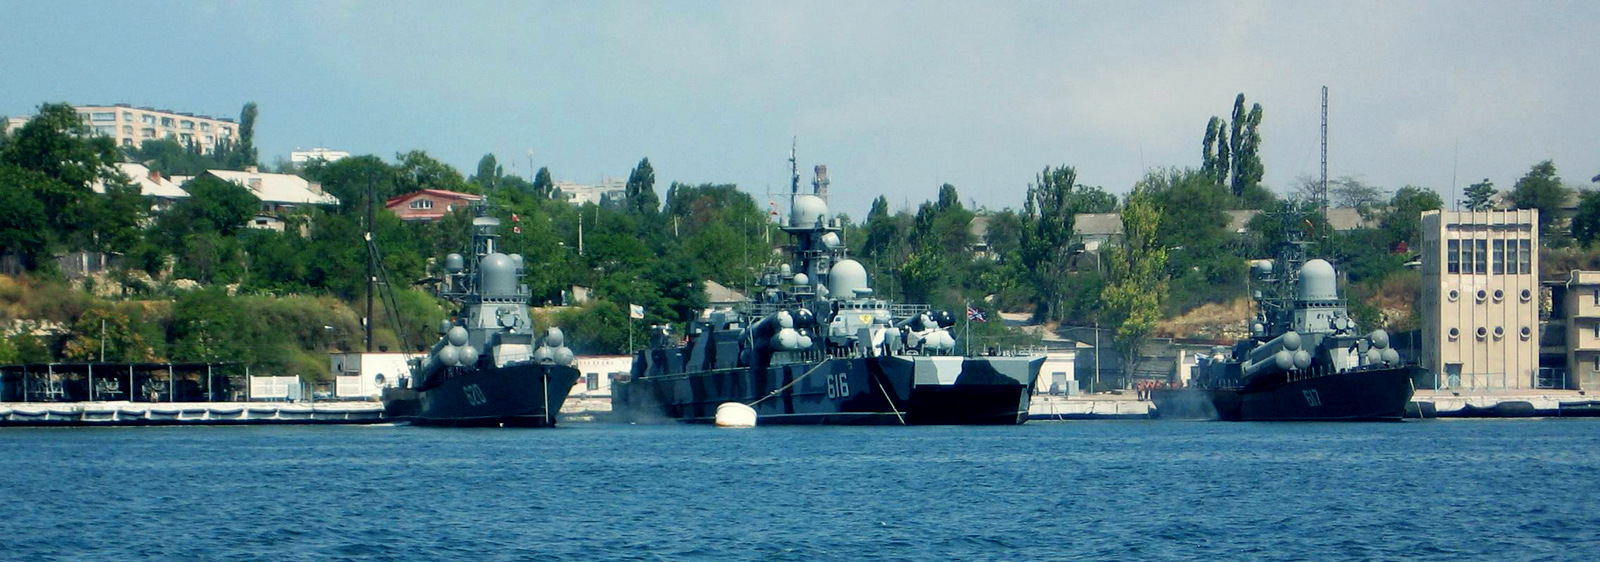 Guided missile corvettes of the Soviet and Russian Black Sea Fleets.